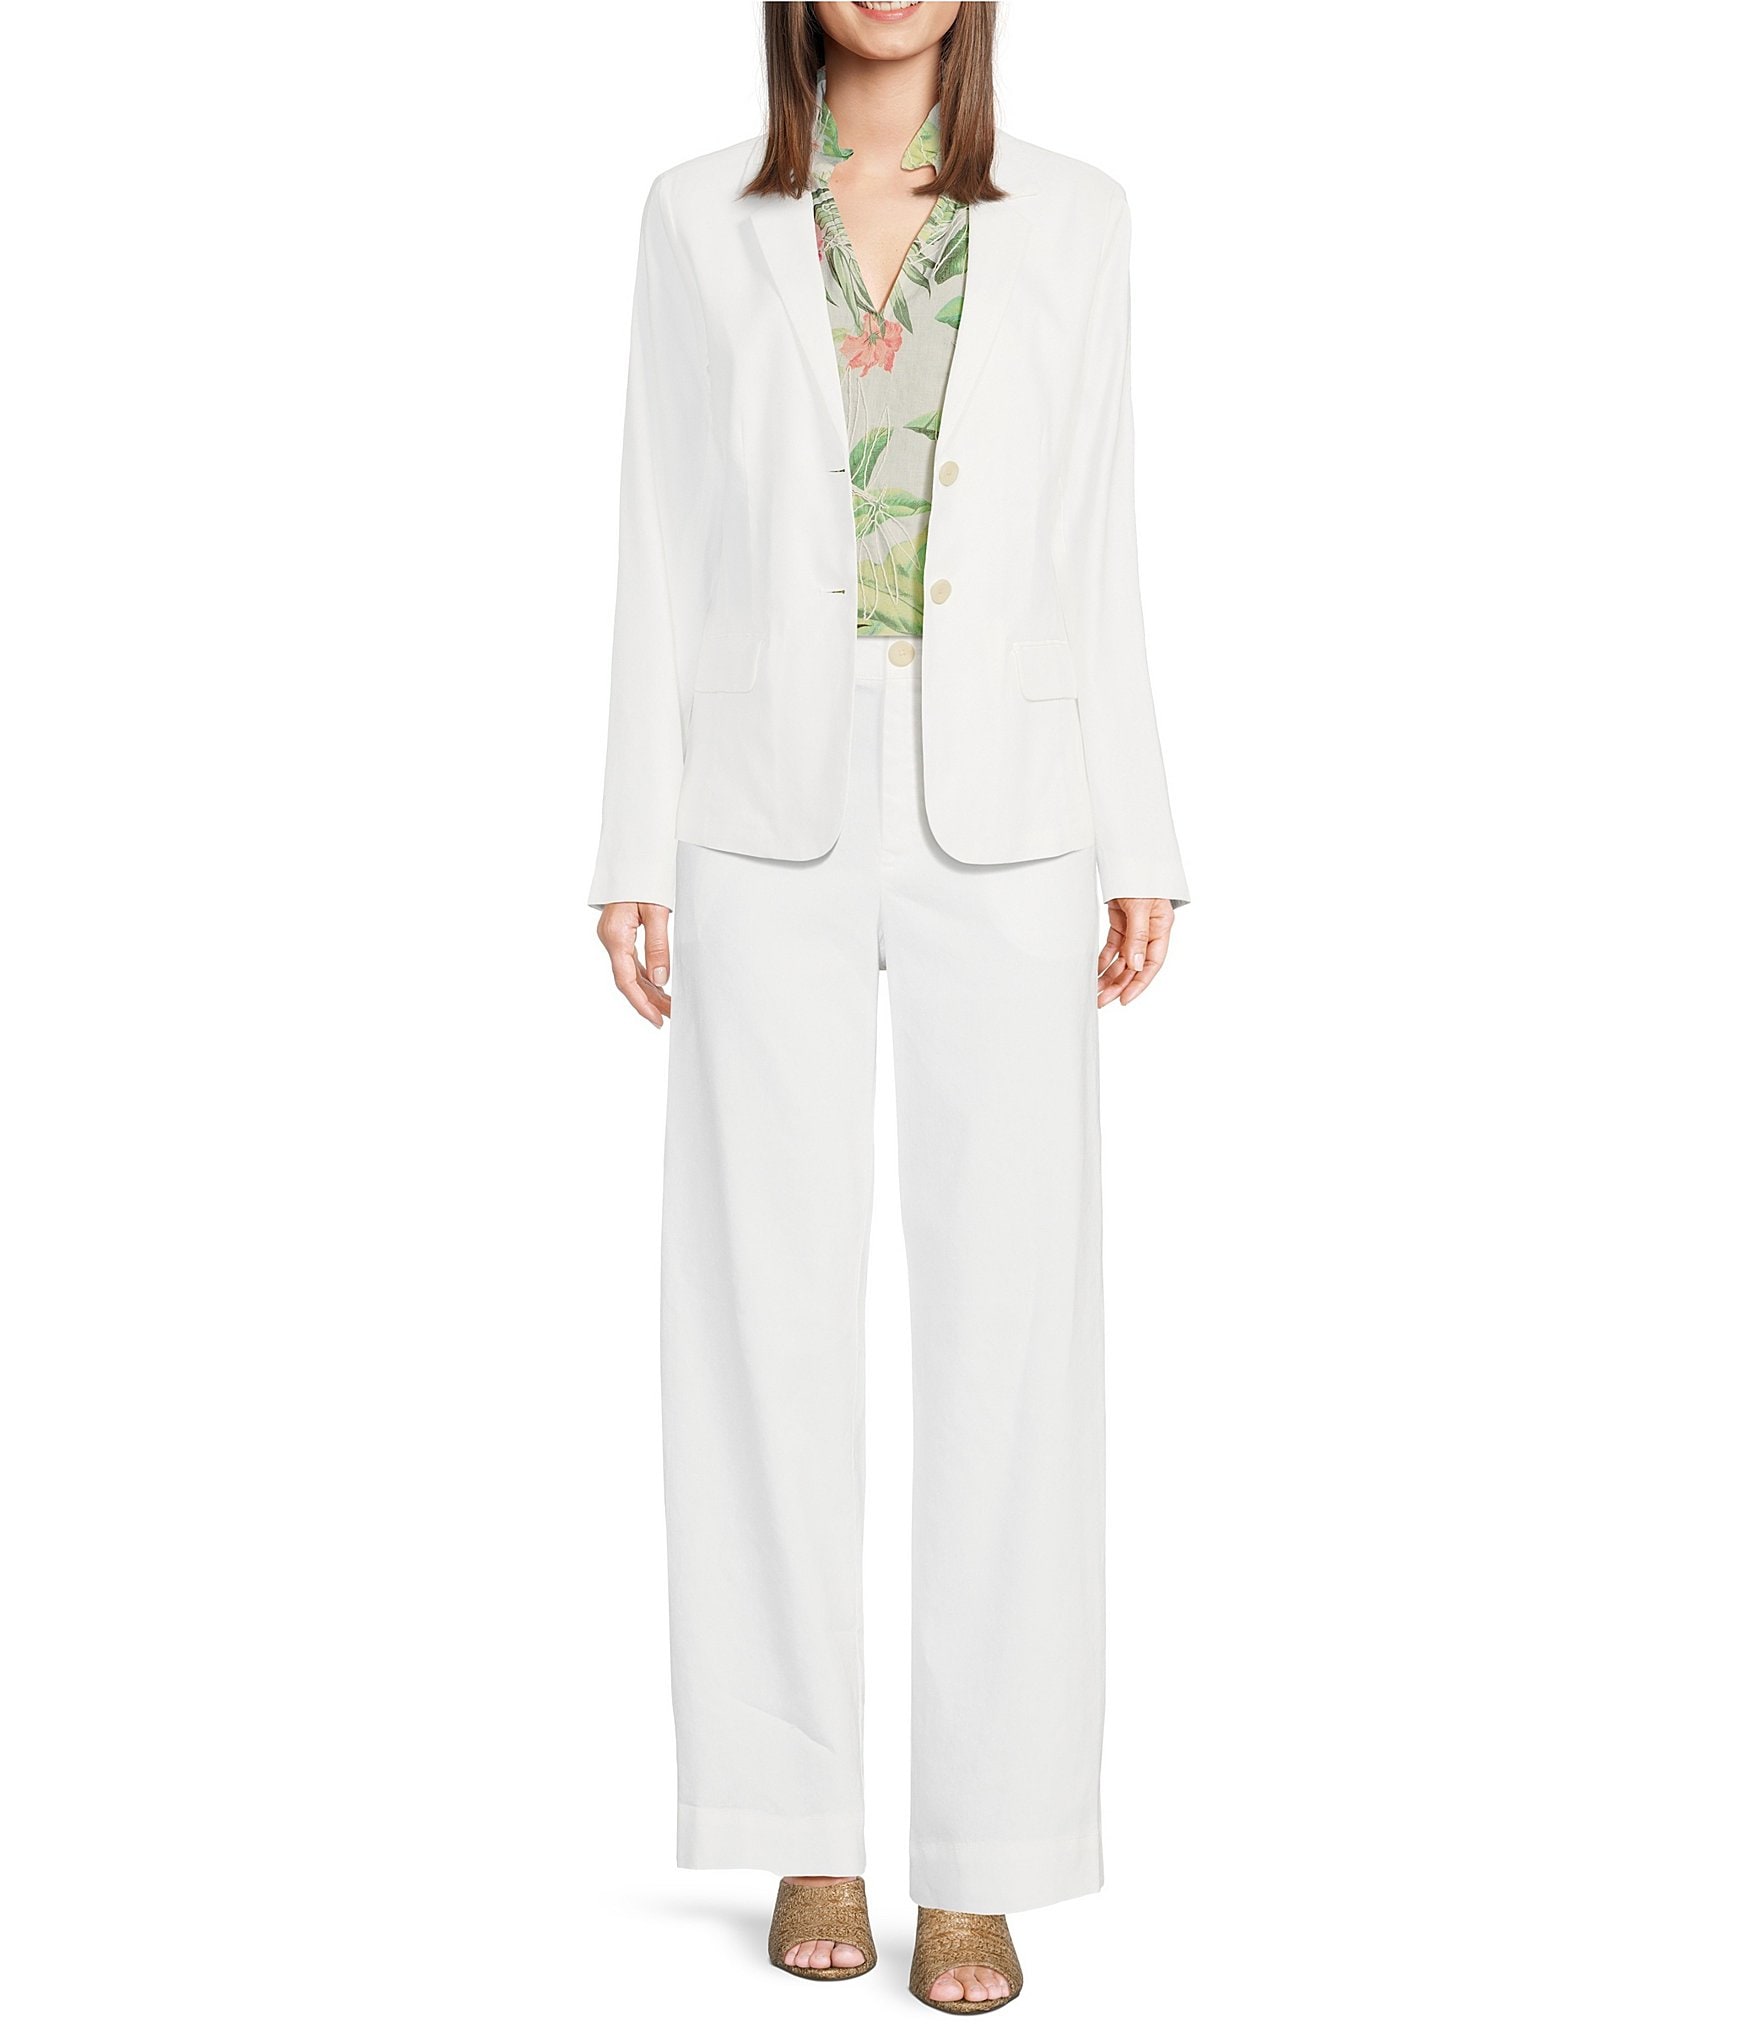 White Pant Suit Womens - For Sale on 1stDibs  white pantsuit, women's  elegant white pant suit, white pant suits